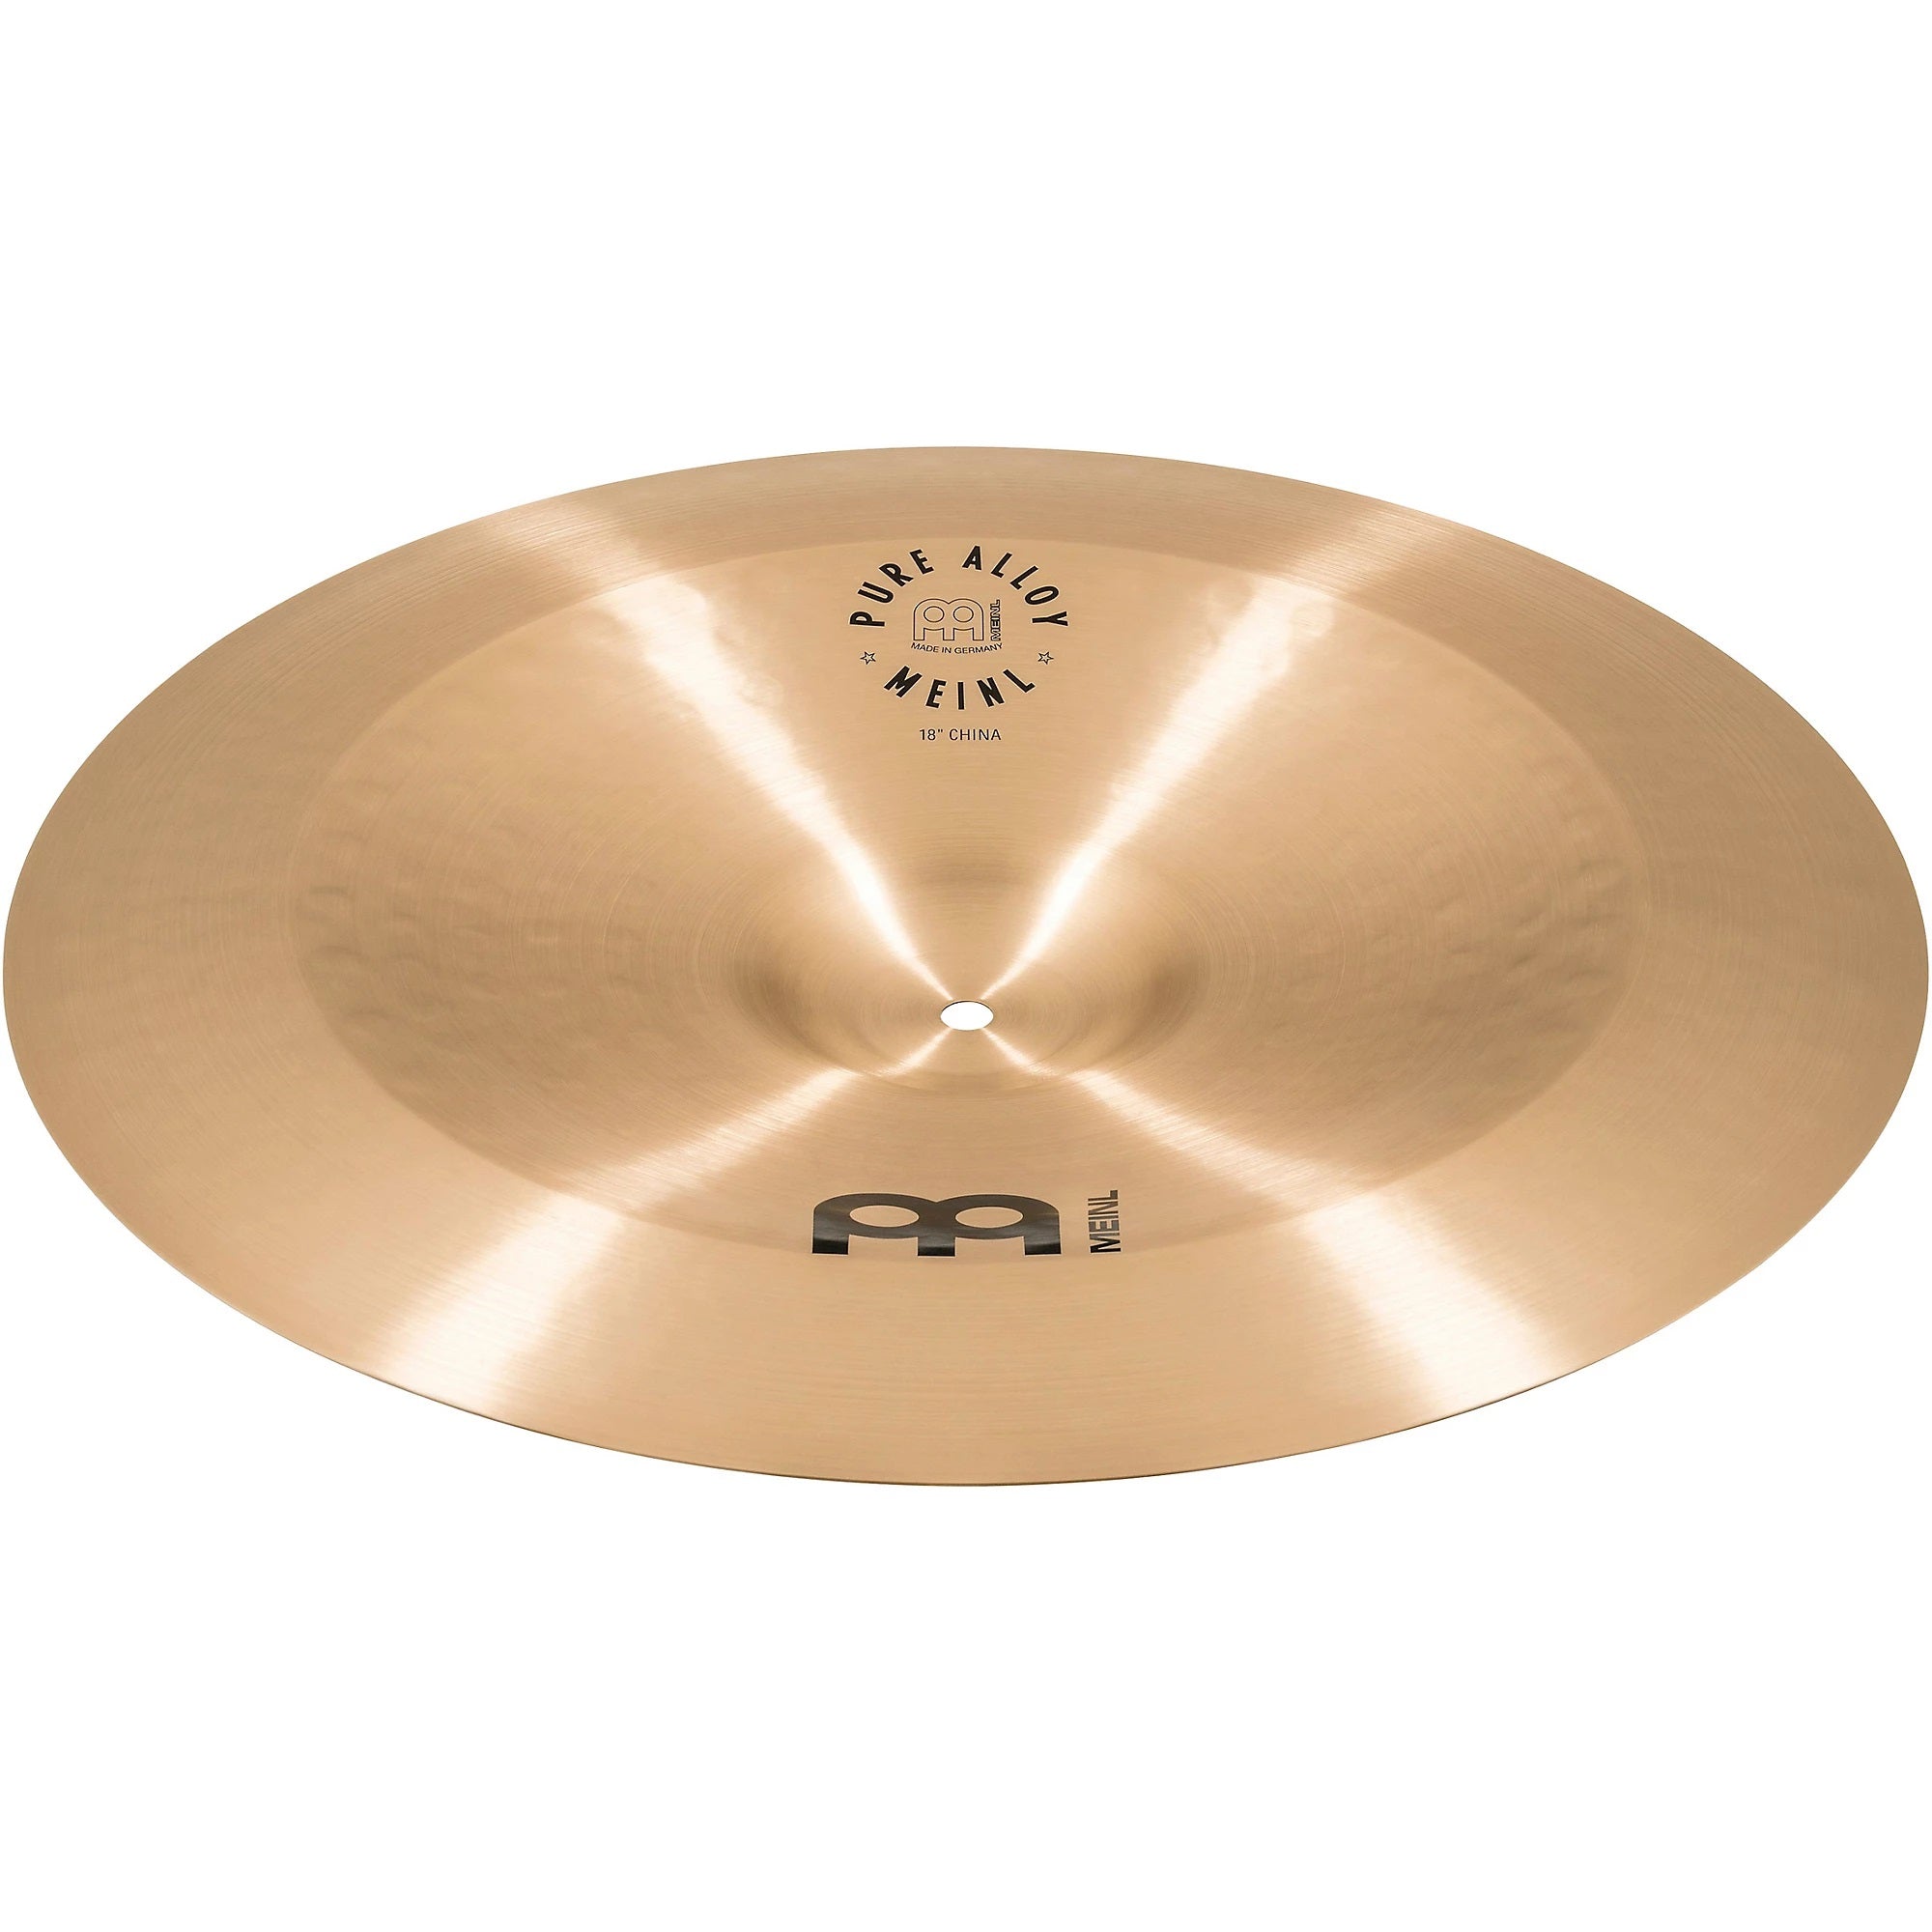 Meinl Pure Alloy China Cymbal 18 in.